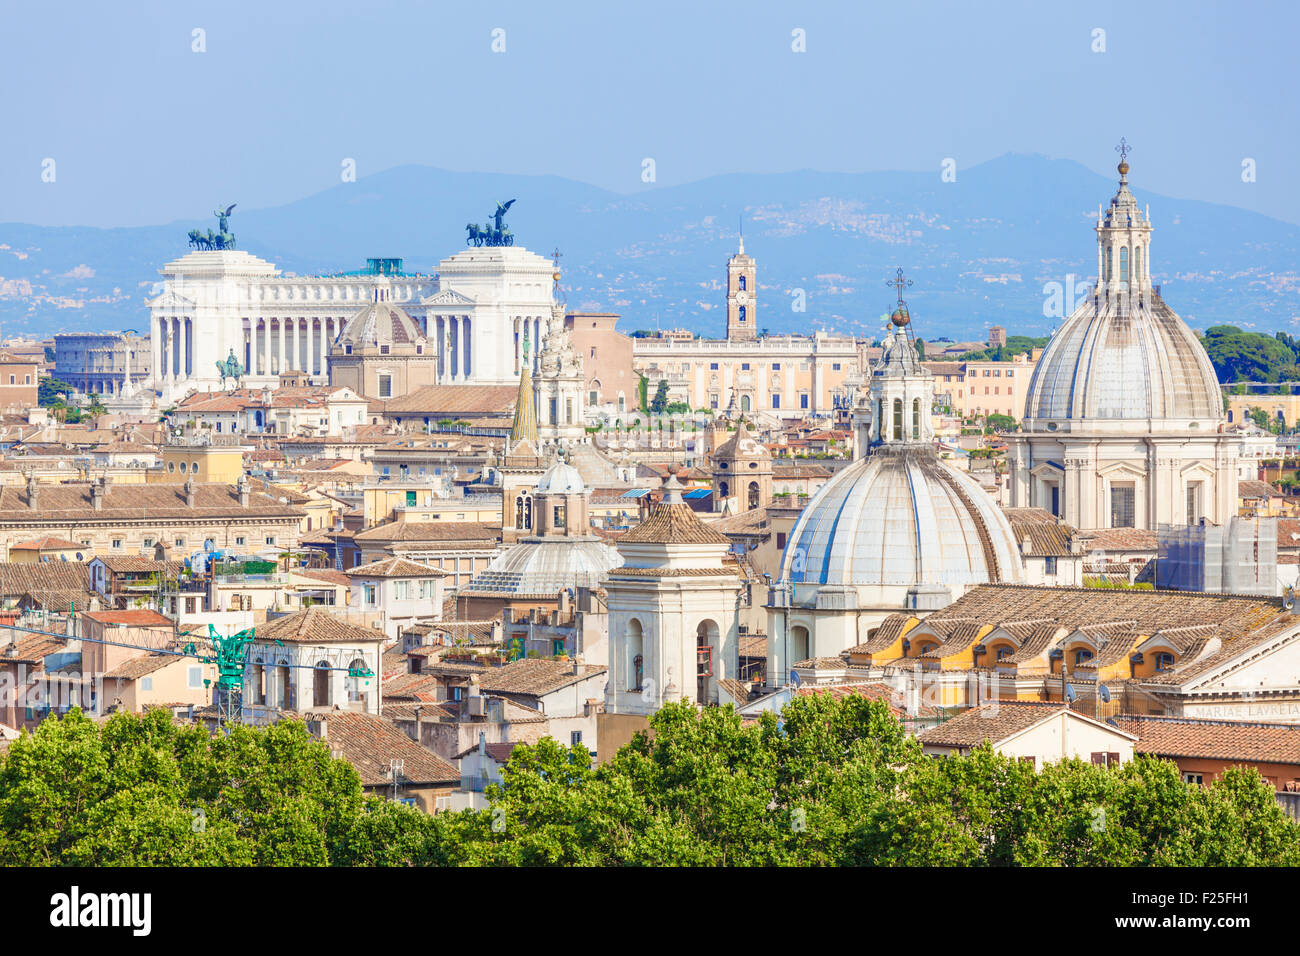 view of churches and domes of the rome skyline showing victor emmanuel II monument in the distance Rome Italy roma EU Europe Stock Photo